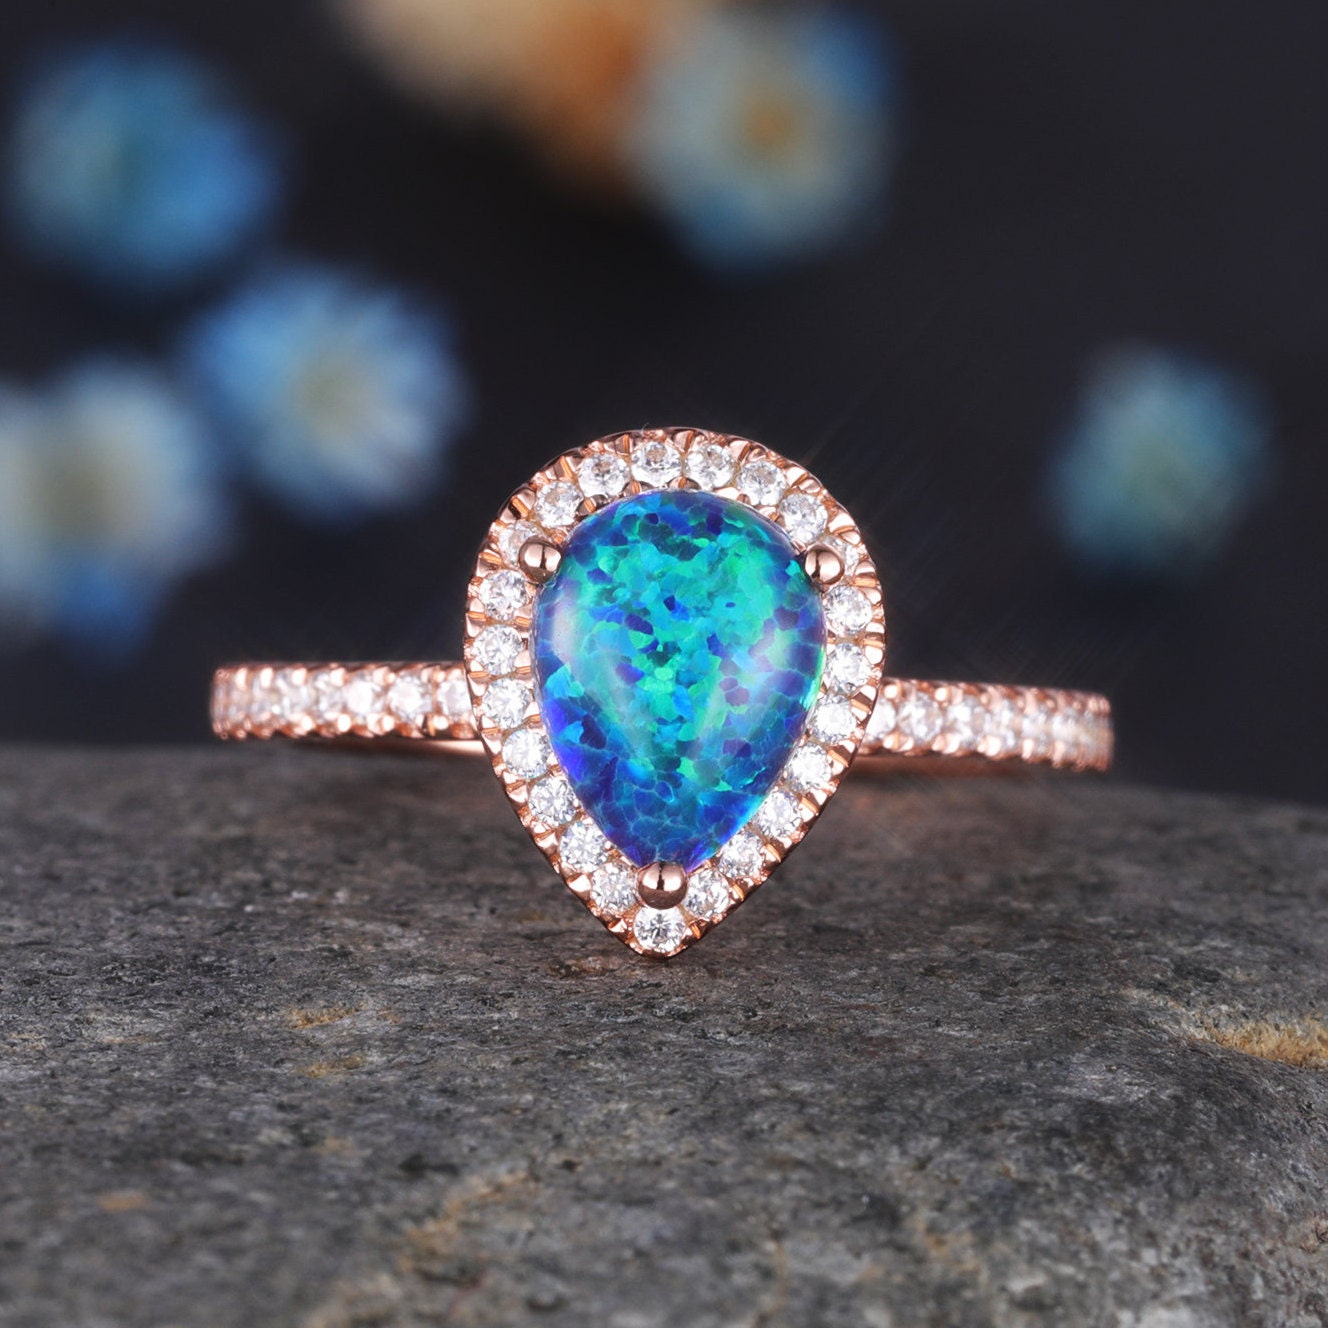 Pear Shaped Black Opal Engagement Ring Diamond Wedding Ring Promise Jewelry For Her 14k Rose Gold October Birthstone Christmas Gift